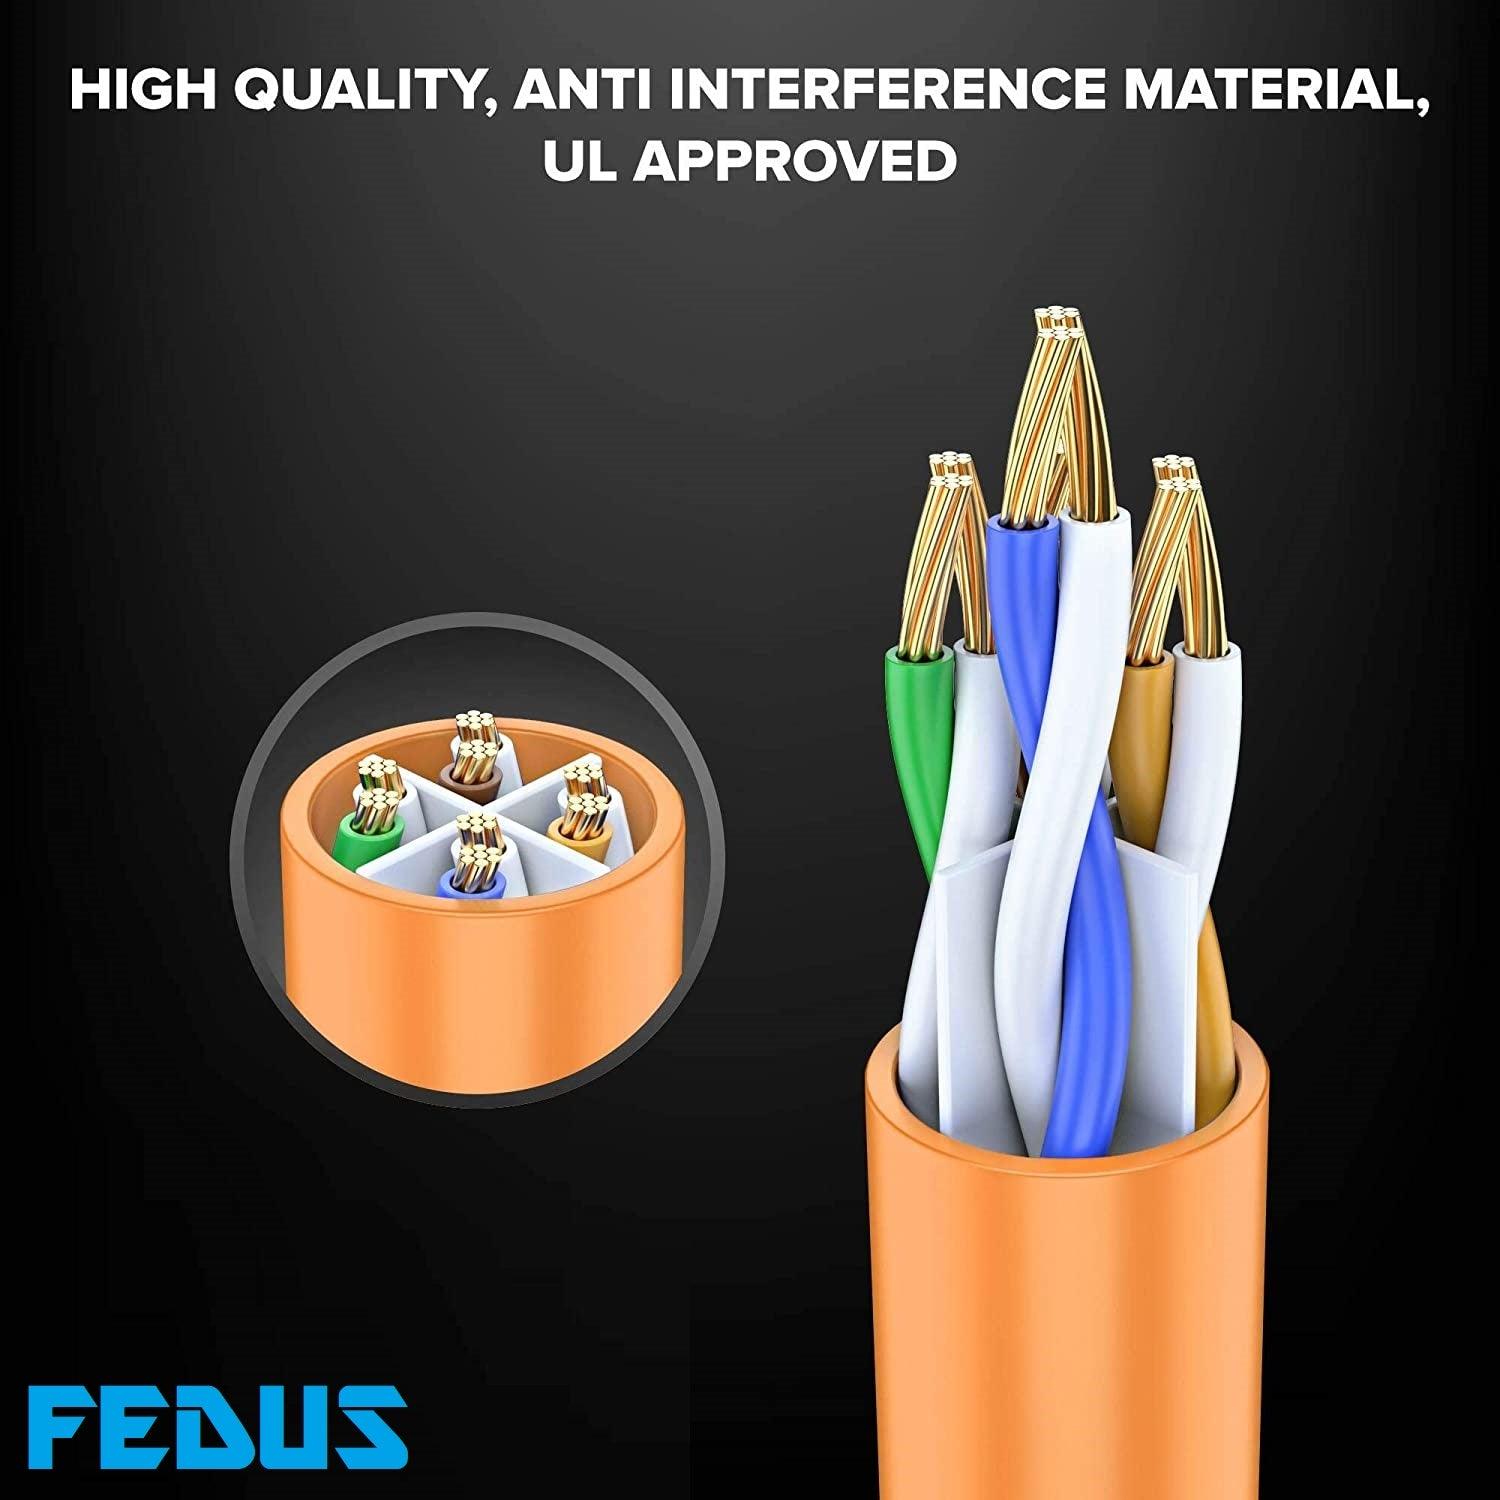 FEDUS Cat6 Ethernet Cable, High Speed 550Mhz 10 Gigabit Speed Utp Lan Cable, Network Cable Internet Cable Rj45 Cable Lan Wire, 6 Wires For Laptop, Pc, Television, Router, Modem-Orange Colour - FEDUS